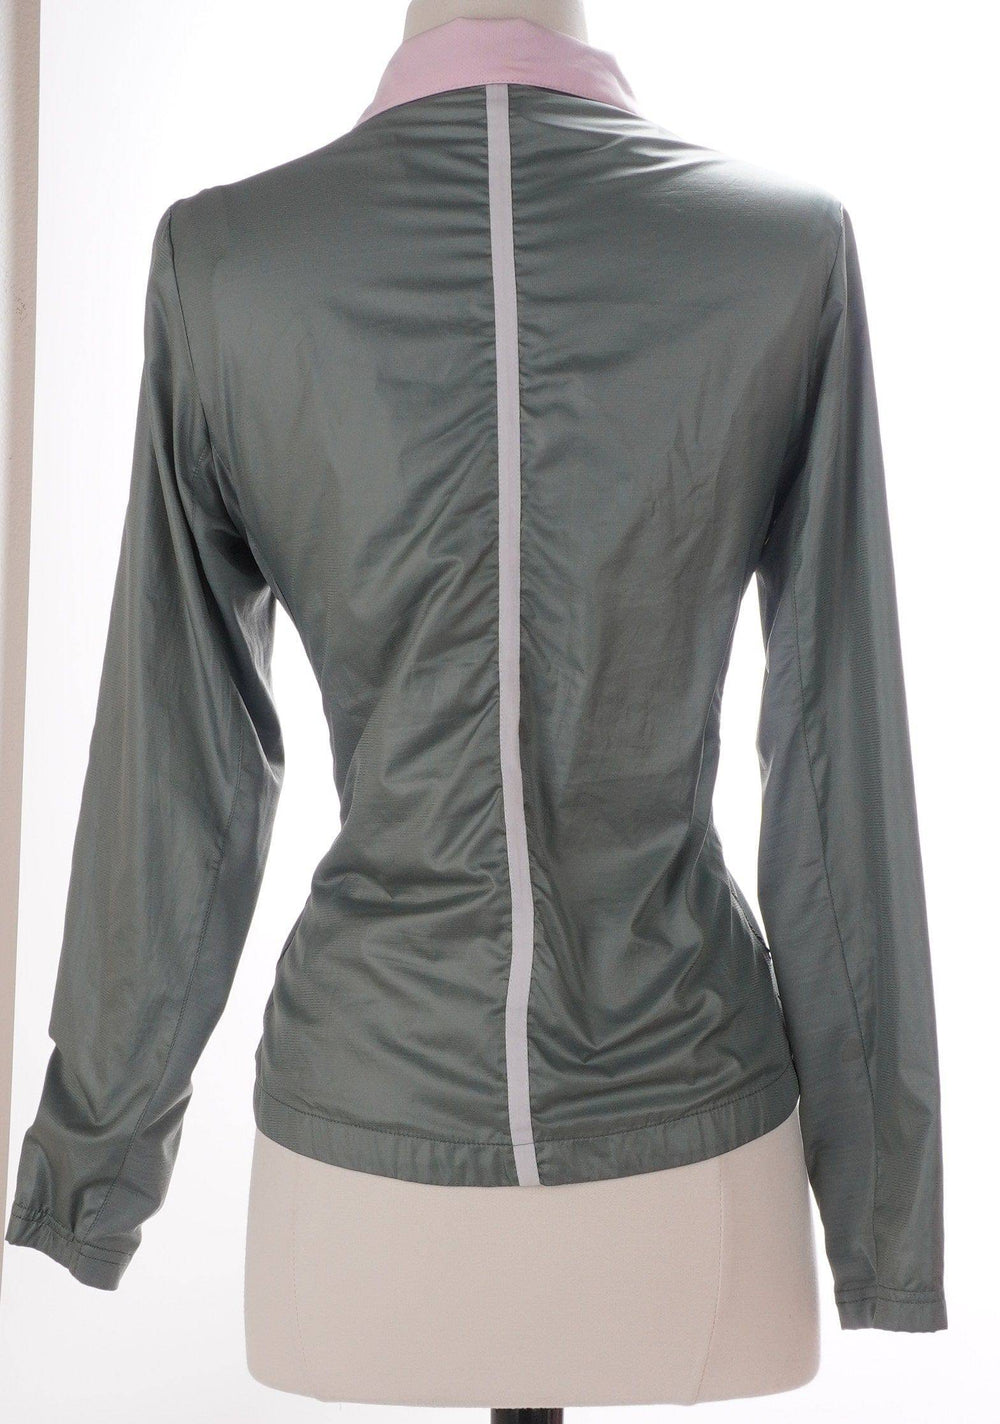 GGblue Green / Small / Consigned GGBlue Long Sleeve Jacket - Green - Size Small